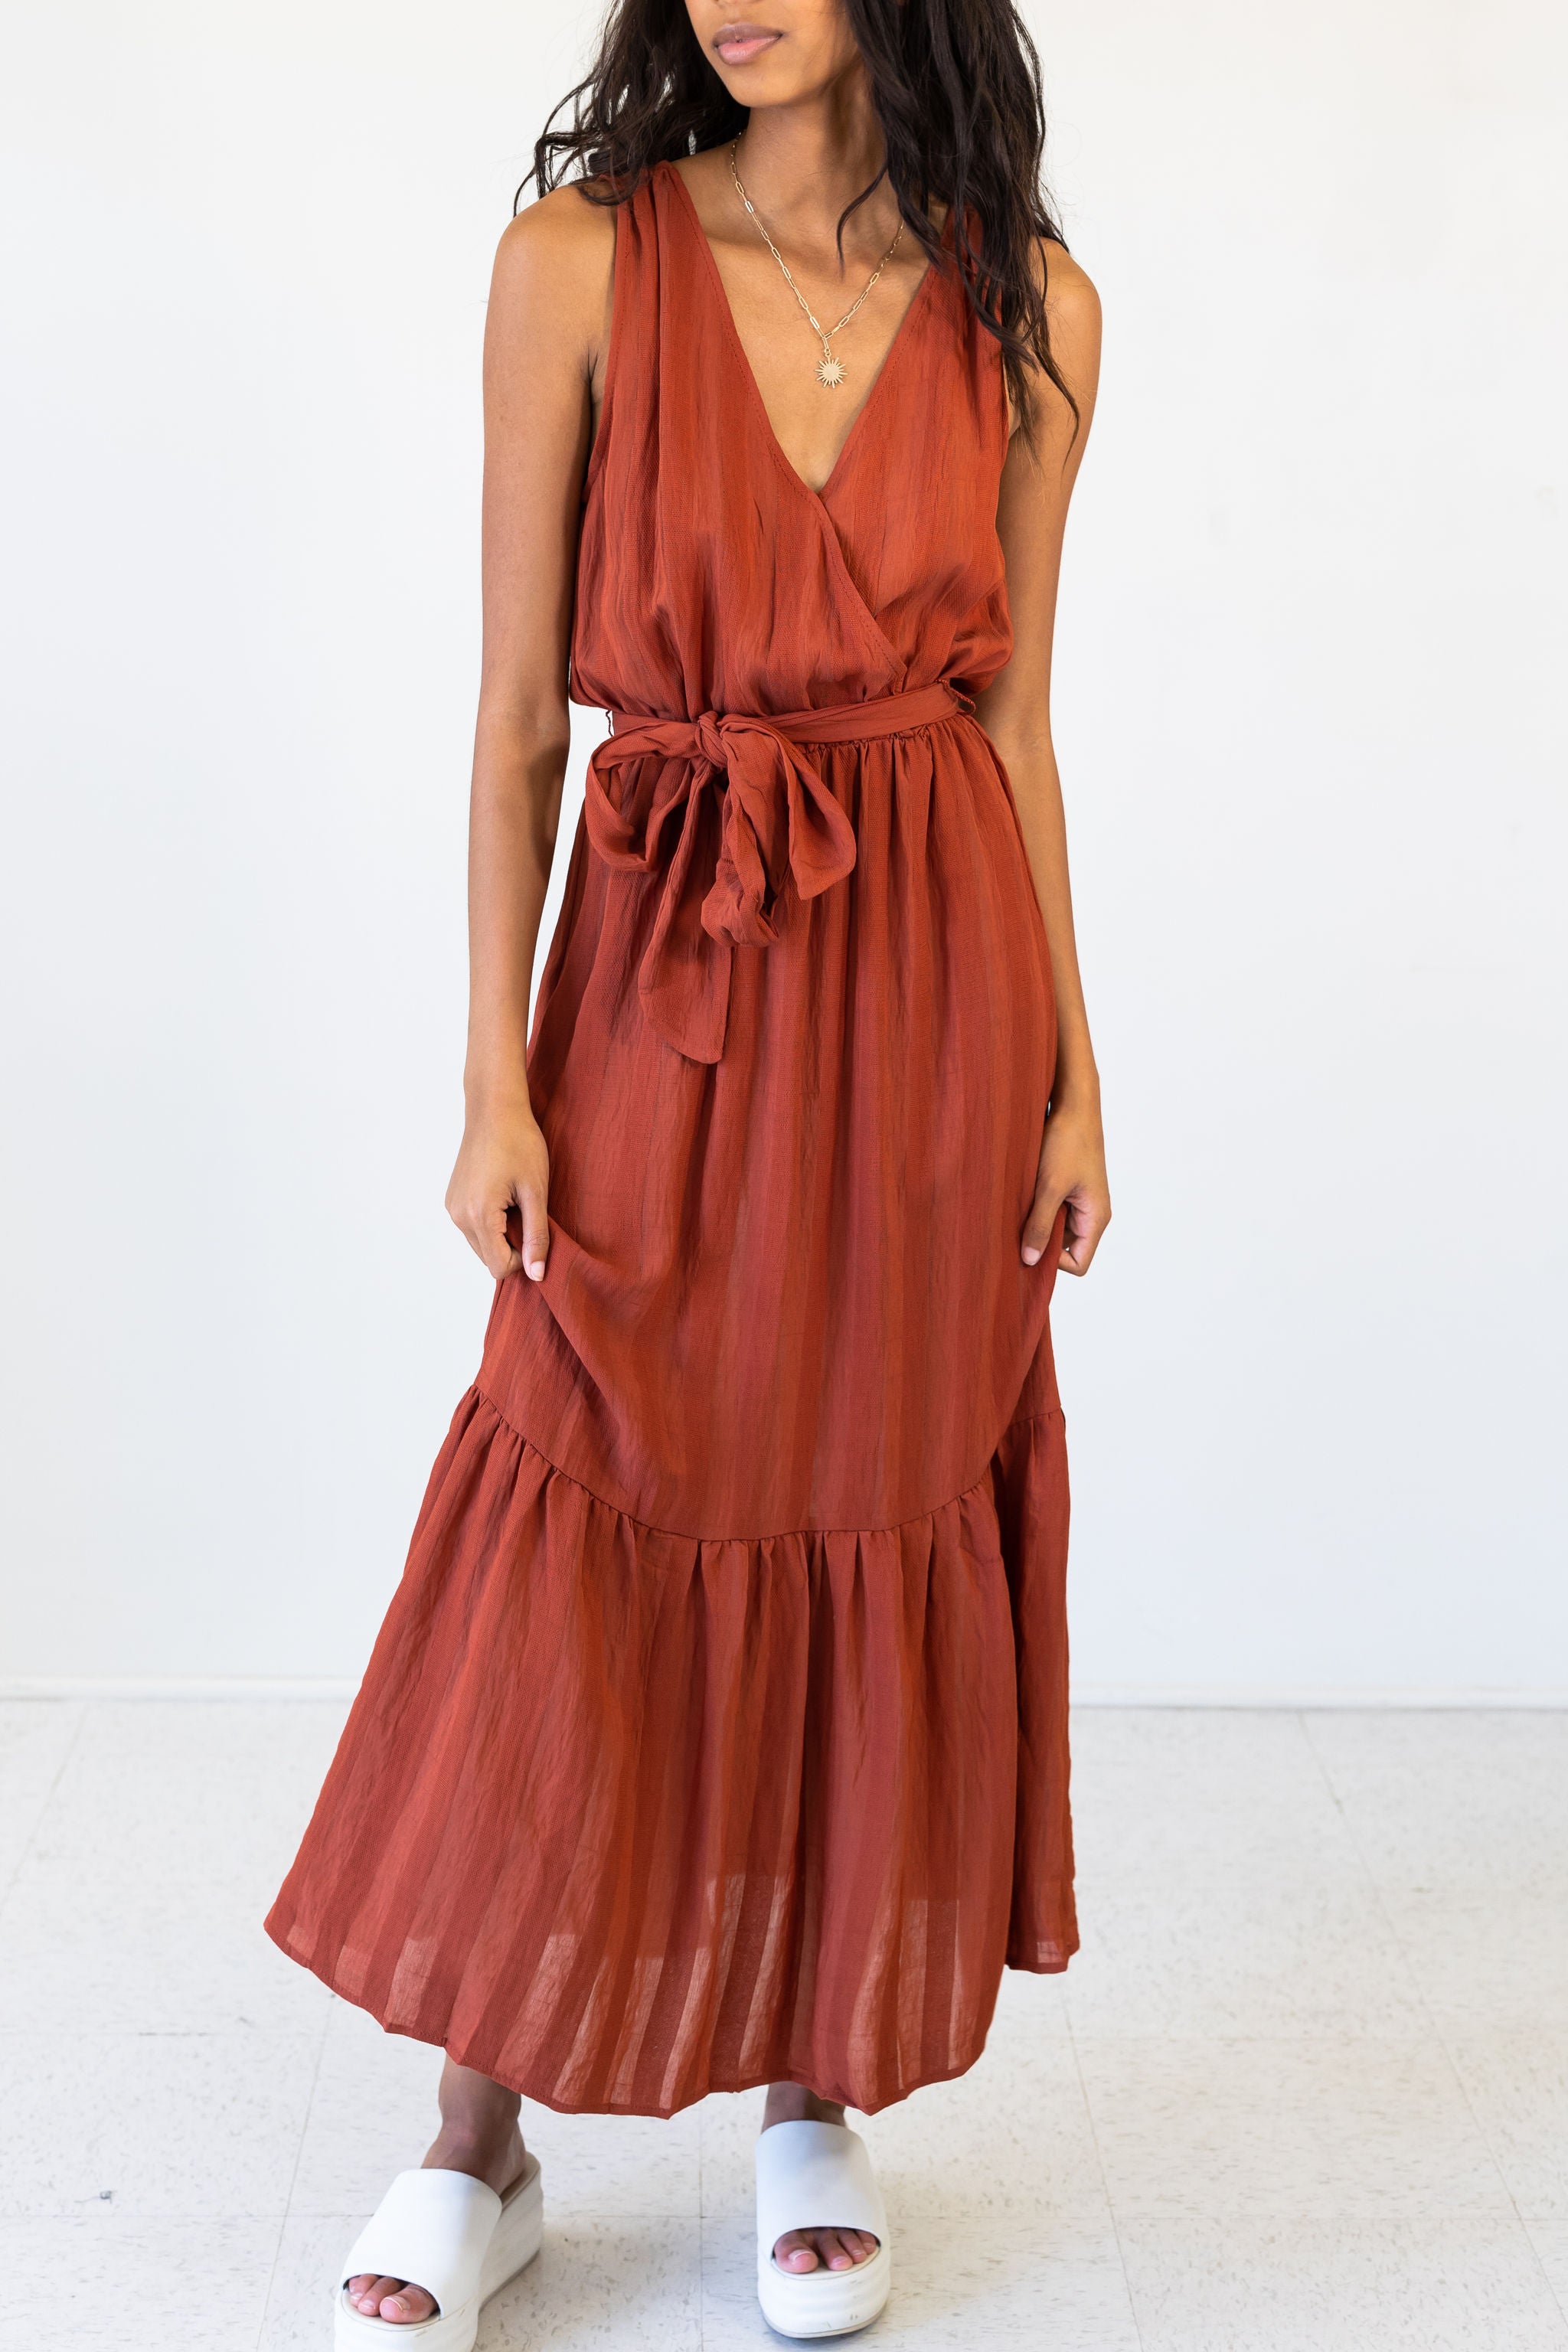 Felt Alive Maxi Dress by For Good